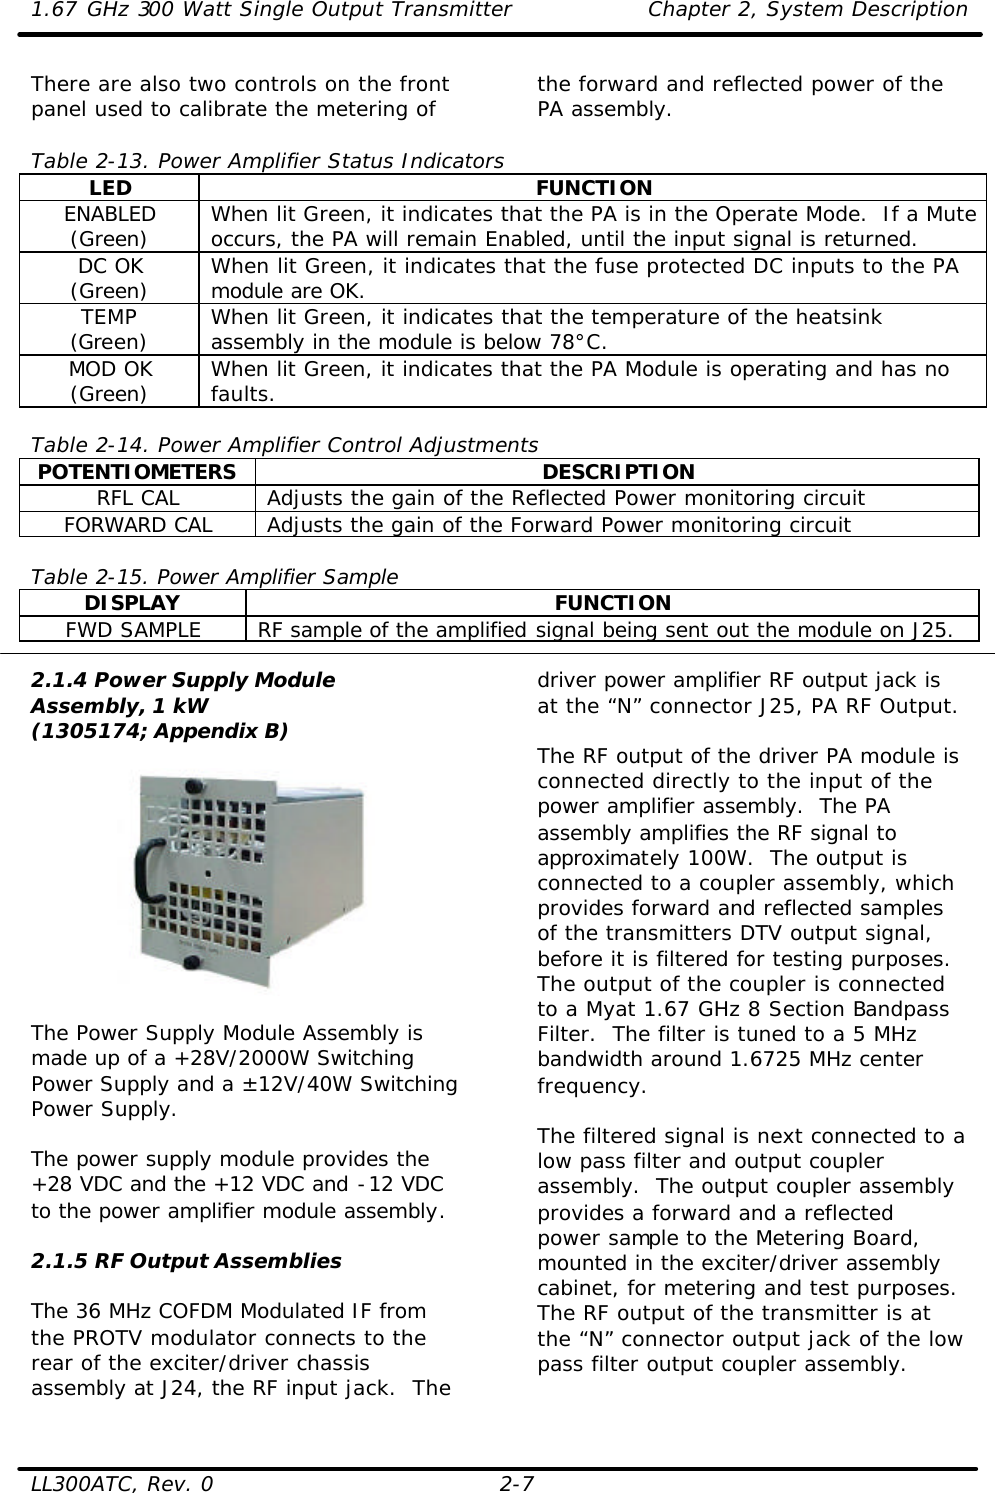 1.67 GHz 300 Watt Single Output Transmitter Chapter 2, System Description  LL300ATC, Rev. 0 2-7 There are also two controls on the front panel used to calibrate the metering of  the forward and reflected power of the PA assembly.    Table 2-13. Power Amplifier Status Indicators LED FUNCTION ENABLED (Green) When lit Green, it indicates that the PA is in the Operate Mode.  If a Mute occurs, the PA will remain Enabled, until the input signal is returned. DC OK (Green) When lit Green, it indicates that the fuse protected DC inputs to the PA module are OK. TEMP (Green) When lit Green, it indicates that the temperature of the heatsink assembly in the module is below 78°C. MOD OK (Green) When lit Green, it indicates that the PA Module is operating and has no faults.  Table 2-14. Power Amplifier Control Adjustments POTENTIOMETERS DESCRIPTION RFL CAL Adjusts the gain of the Reflected Power monitoring circuit FORWARD CAL Adjusts the gain of the Forward Power monitoring circuit  Table 2-15. Power Amplifier Sample DISPLAY FUNCTION FWD SAMPLE RF sample of the amplified signal being sent out the module on J25.  2.1.4 Power Supply Module Assembly, 1 kW (1305174; Appendix B)    The Power Supply Module Assembly is made up of a +28V/2000W Switching Power Supply and a ±12V/40W Switching Power Supply.   The power supply module provides the +28 VDC and the +12 VDC and -12 VDC to the power amplifier module assembly.  2.1.5 RF Output Assemblies  The 36 MHz COFDM Modulated IF from the PROTV modulator connects to the rear of the exciter/driver chassis assembly at J24, the RF input jack.  The driver power amplifier RF output jack is at the “N” connector J25, PA RF Output.   The RF output of the driver PA module is connected directly to the input of the power amplifier assembly.  The PA assembly amplifies the RF signal to approximately 100W.  The output is connected to a coupler assembly, which provides forward and reflected samples of the transmitters DTV output signal, before it is filtered for testing purposes.  The output of the coupler is connected to a Myat 1.67 GHz 8 Section Bandpass Filter.  The filter is tuned to a 5 MHz bandwidth around 1.6725 MHz center frequency.  The filtered signal is next connected to a low pass filter and output coupler assembly.  The output coupler assembly provides a forward and a reflected power sample to the Metering Board, mounted in the exciter/driver assembly cabinet, for metering and test purposes.  The RF output of the transmitter is at the “N” connector output jack of the low pass filter output coupler assembly. 